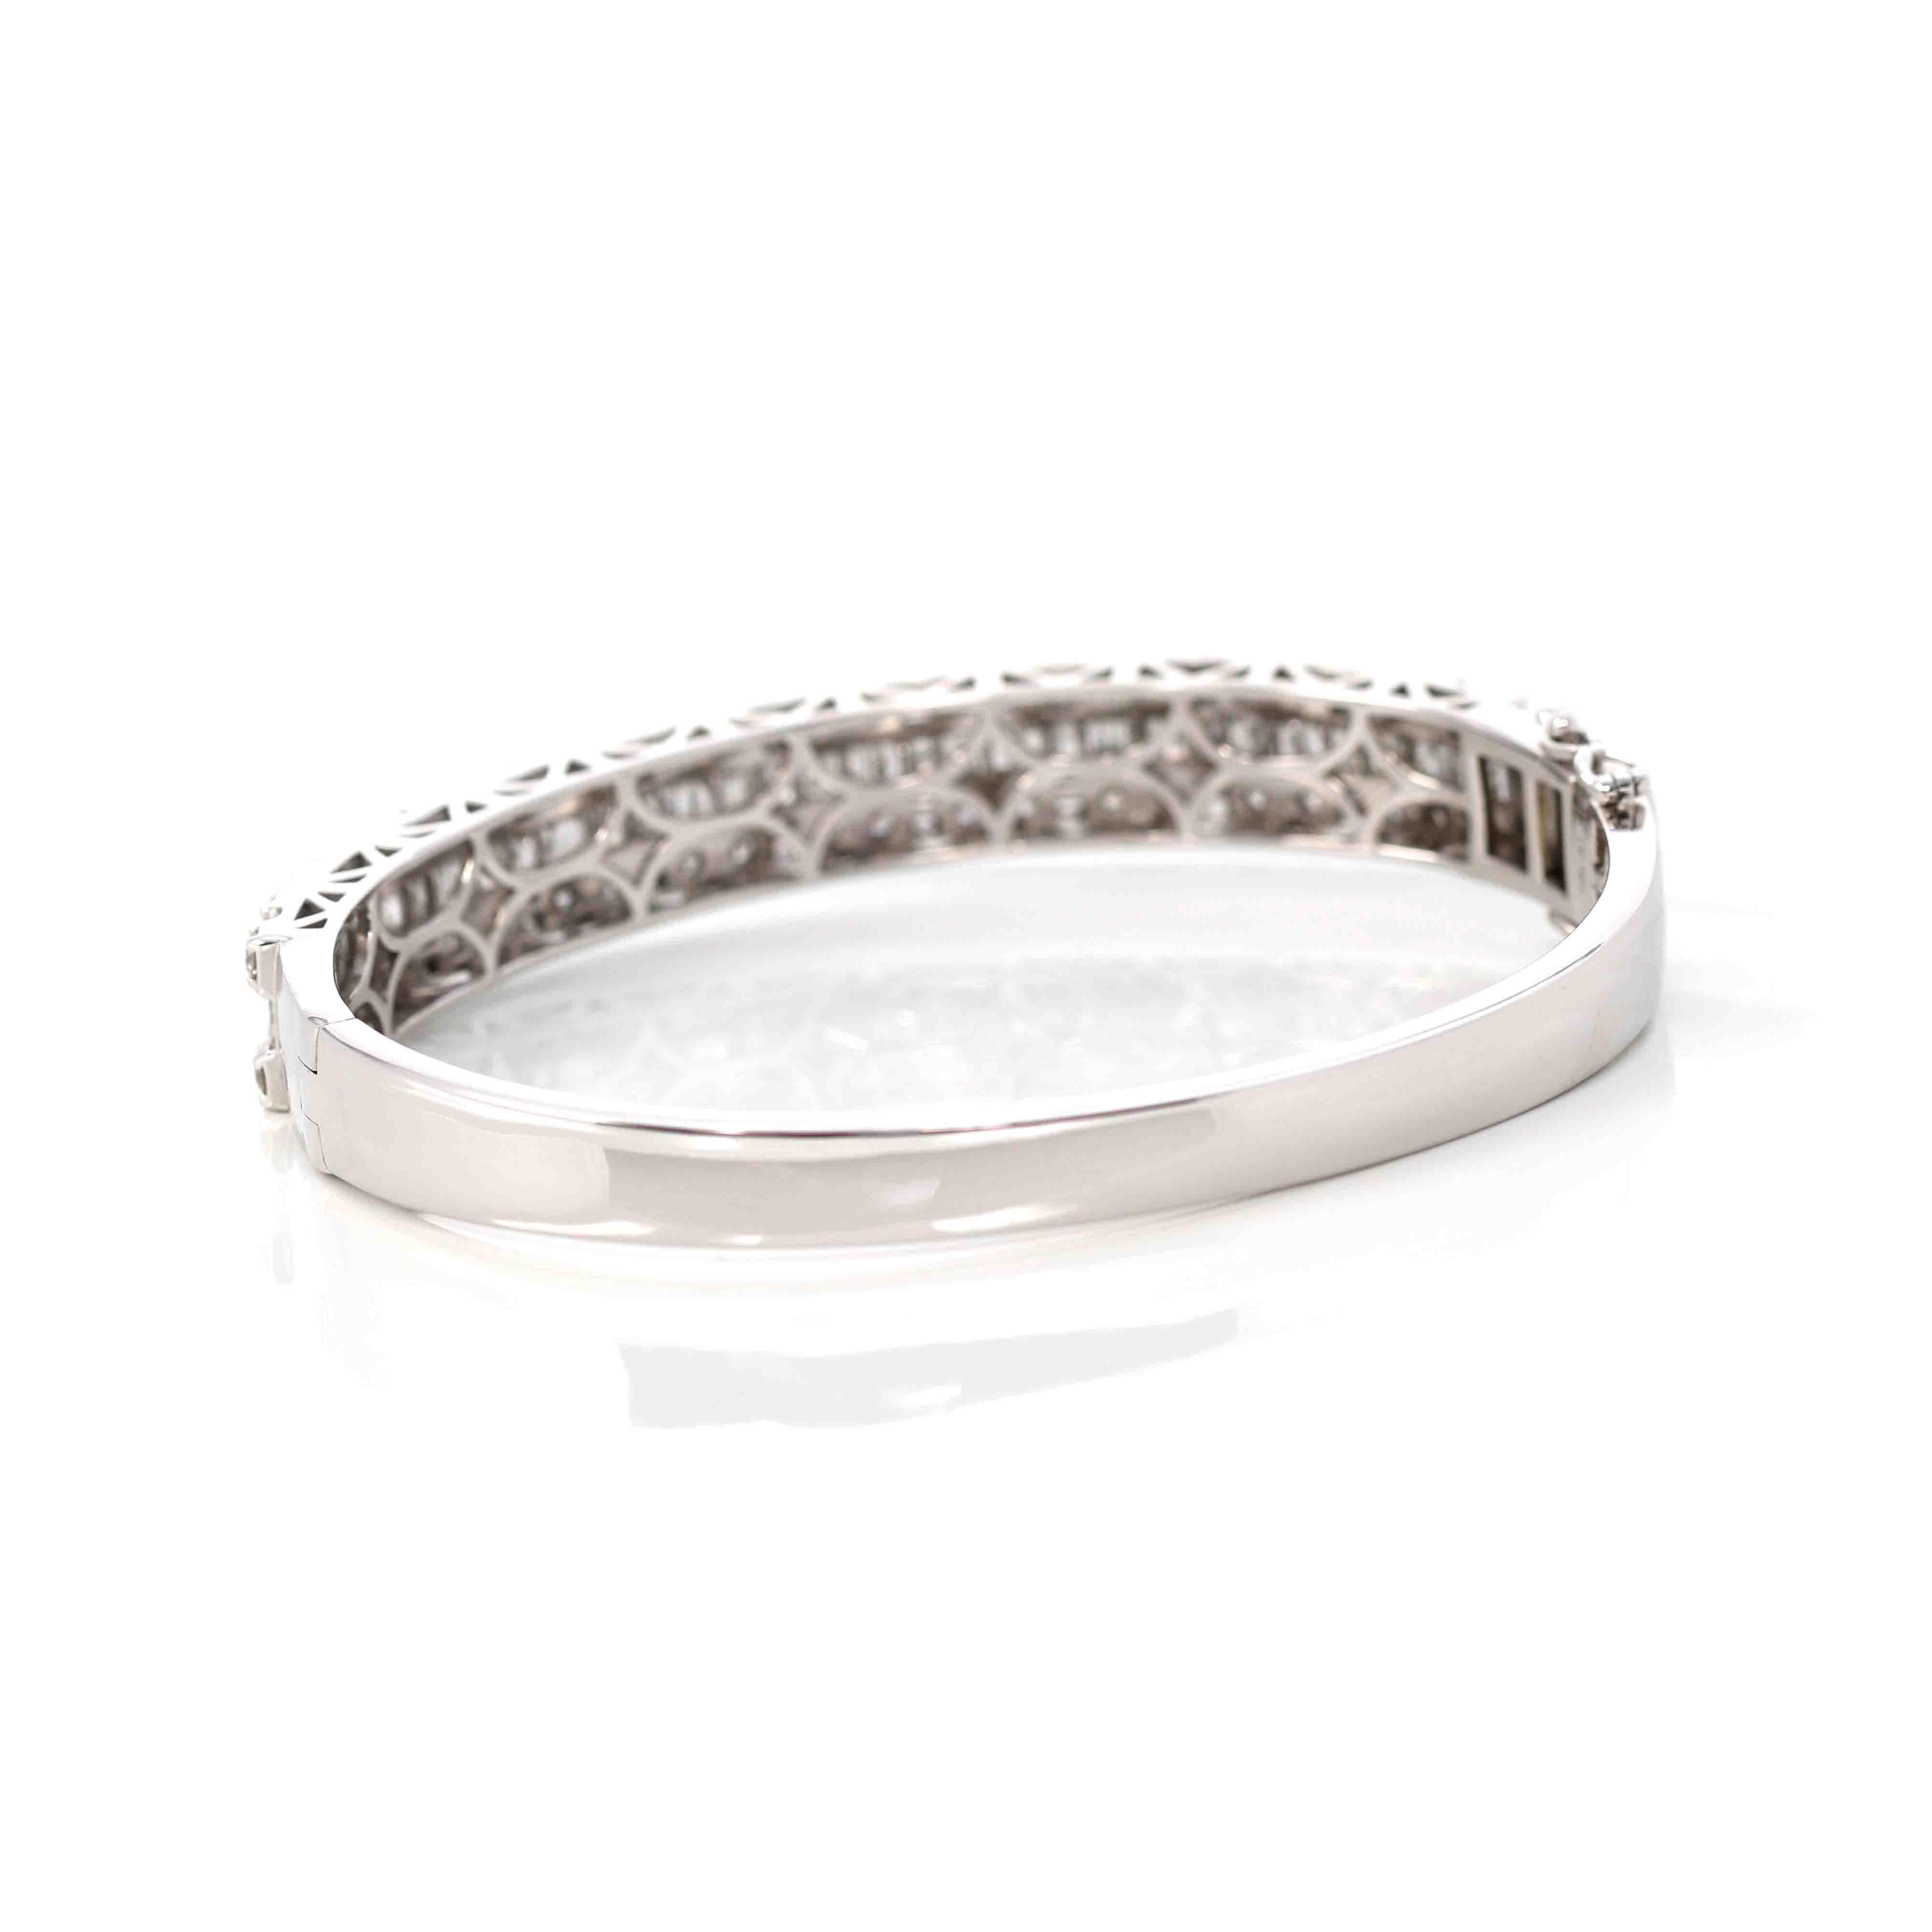 10k White Gold Channel Set Baguette& Round Diamonds Oval Bangle Bracelet In New Condition For Sale In Portland, OR